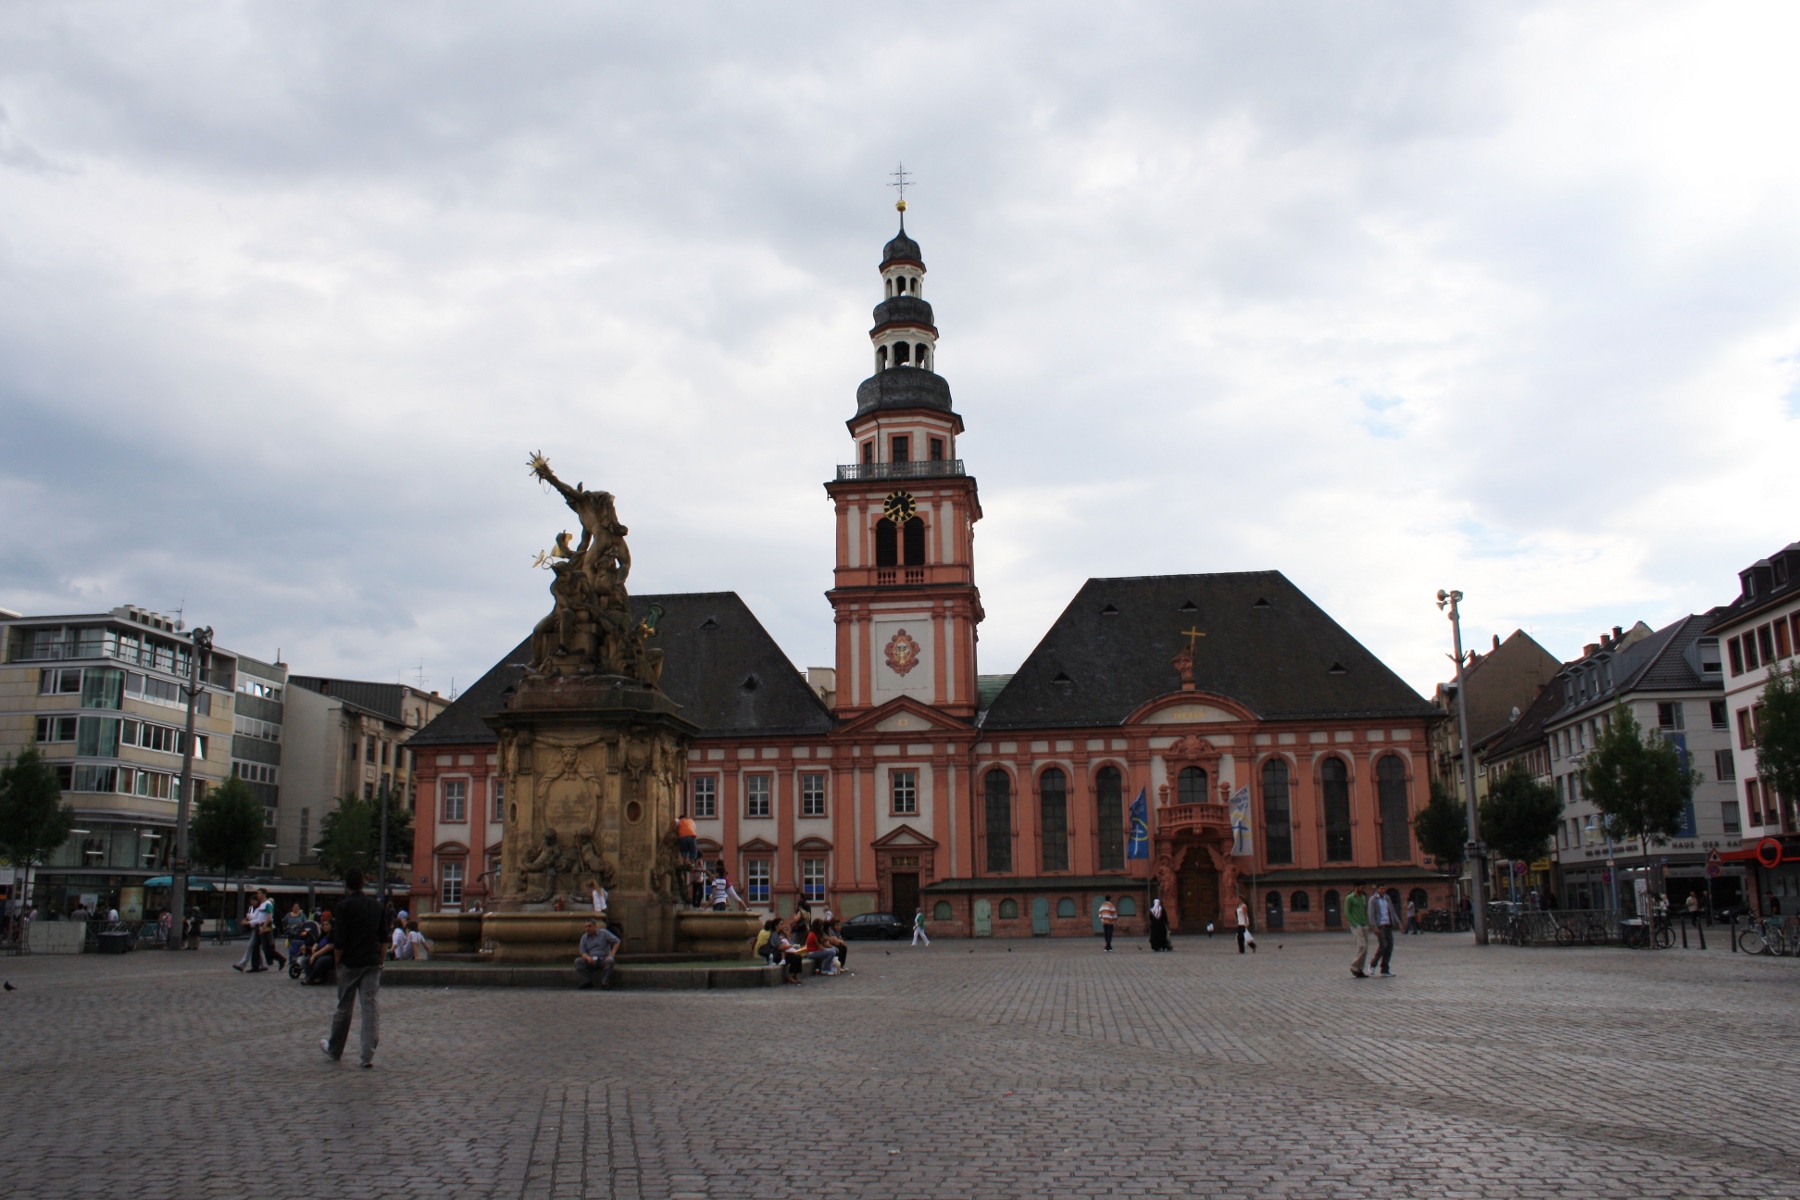 "Mannheim Altes-Rathaus 00" by Paddy - Own work. Licensed under CC BY-SA 3.0 via Wikimedia Commons - https://commons.wikimedia.org/wiki/File:Mannheim_Altes-Rathaus_00.jpg#/media/File:Mannheim_Altes-Rathaus_00.jpg